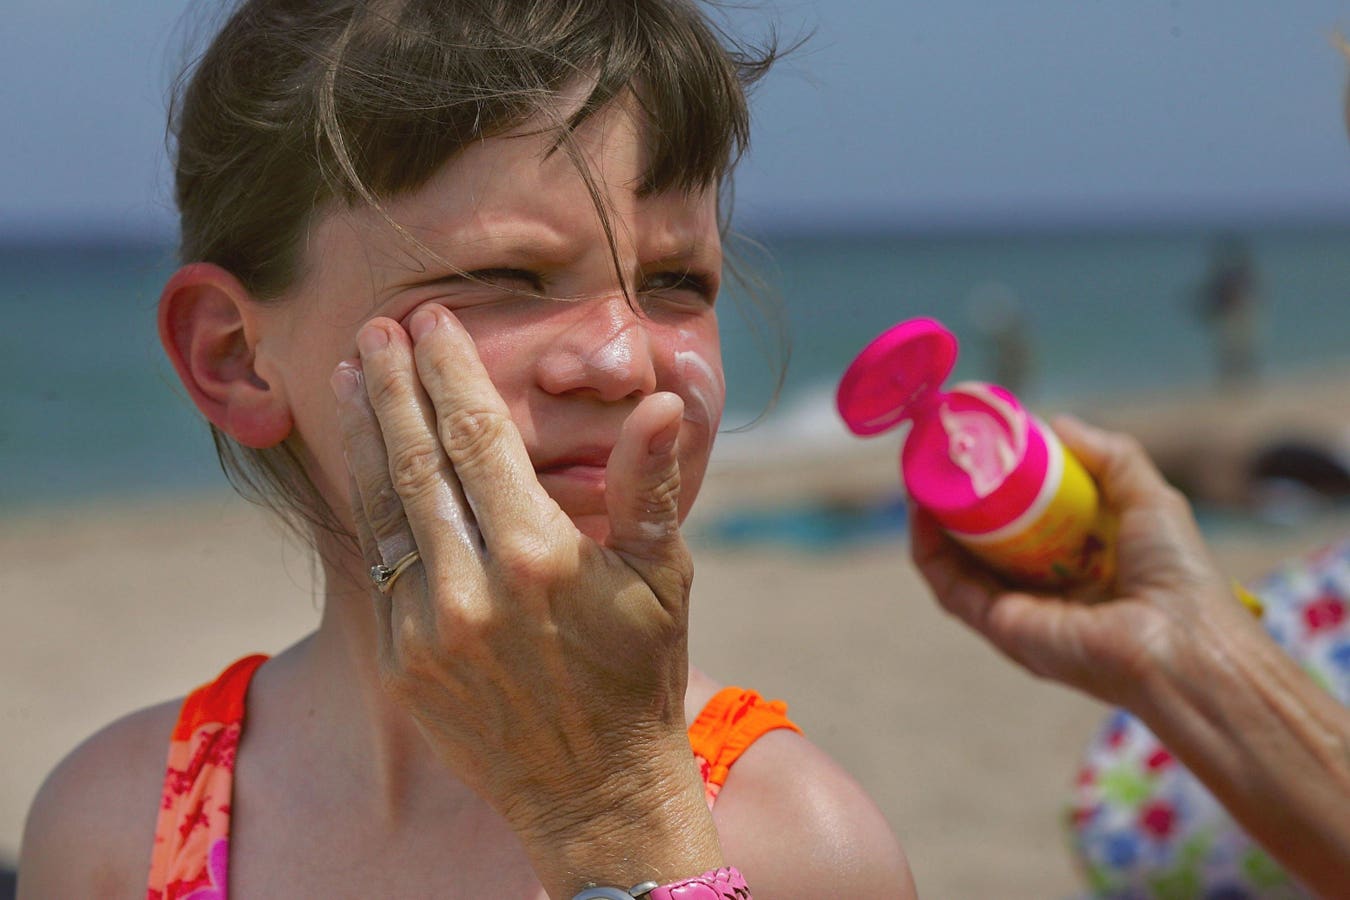 Are You Using Expired Sunscreen? You Could Still Get A Sunburn.